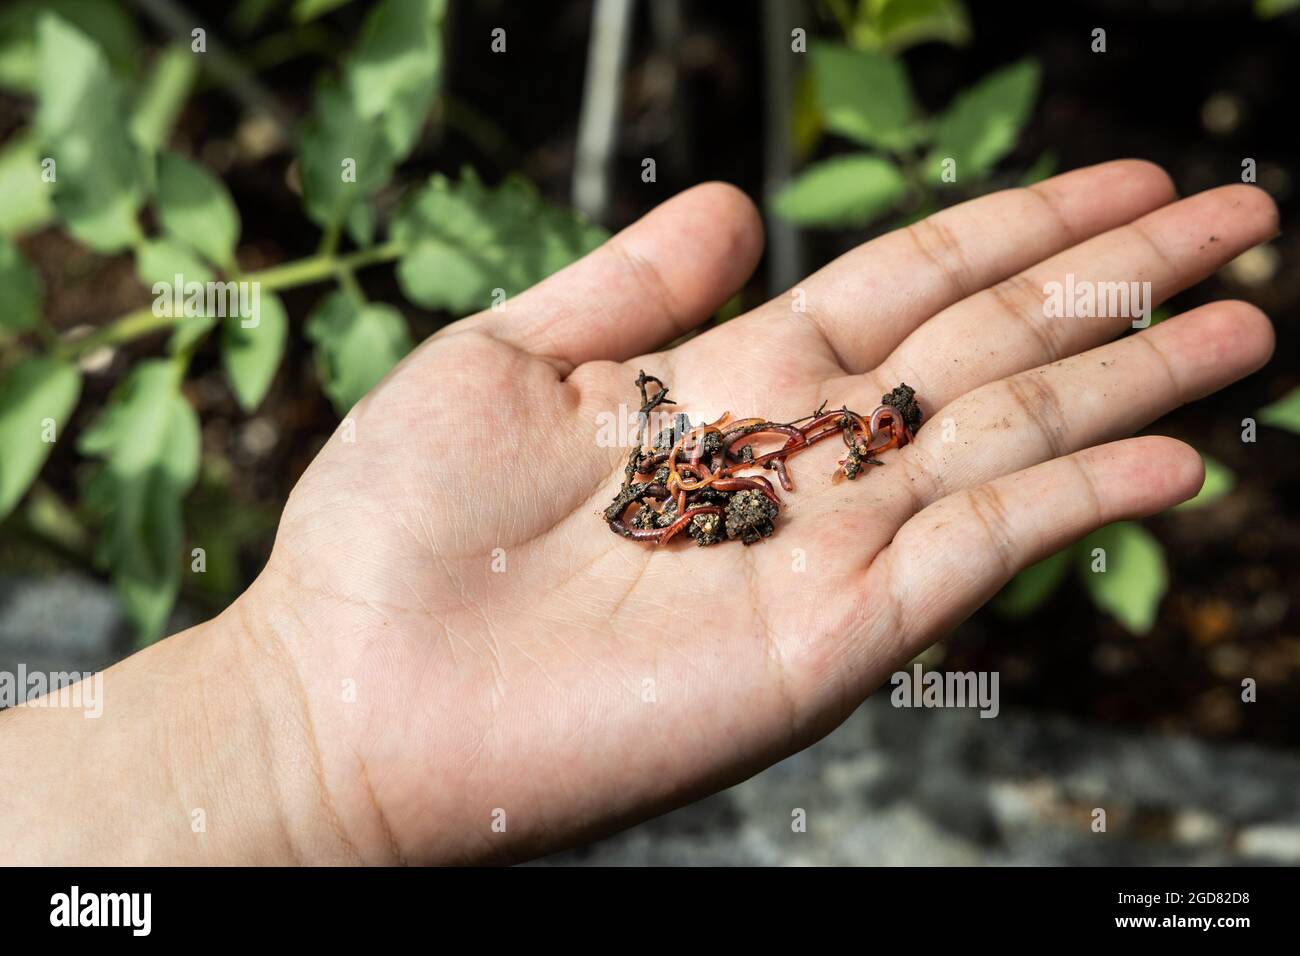 Hand holding clumps of red wrigglers earthworms against plants at background. They are used in vermicomposting to improve soil quality Stock Photo